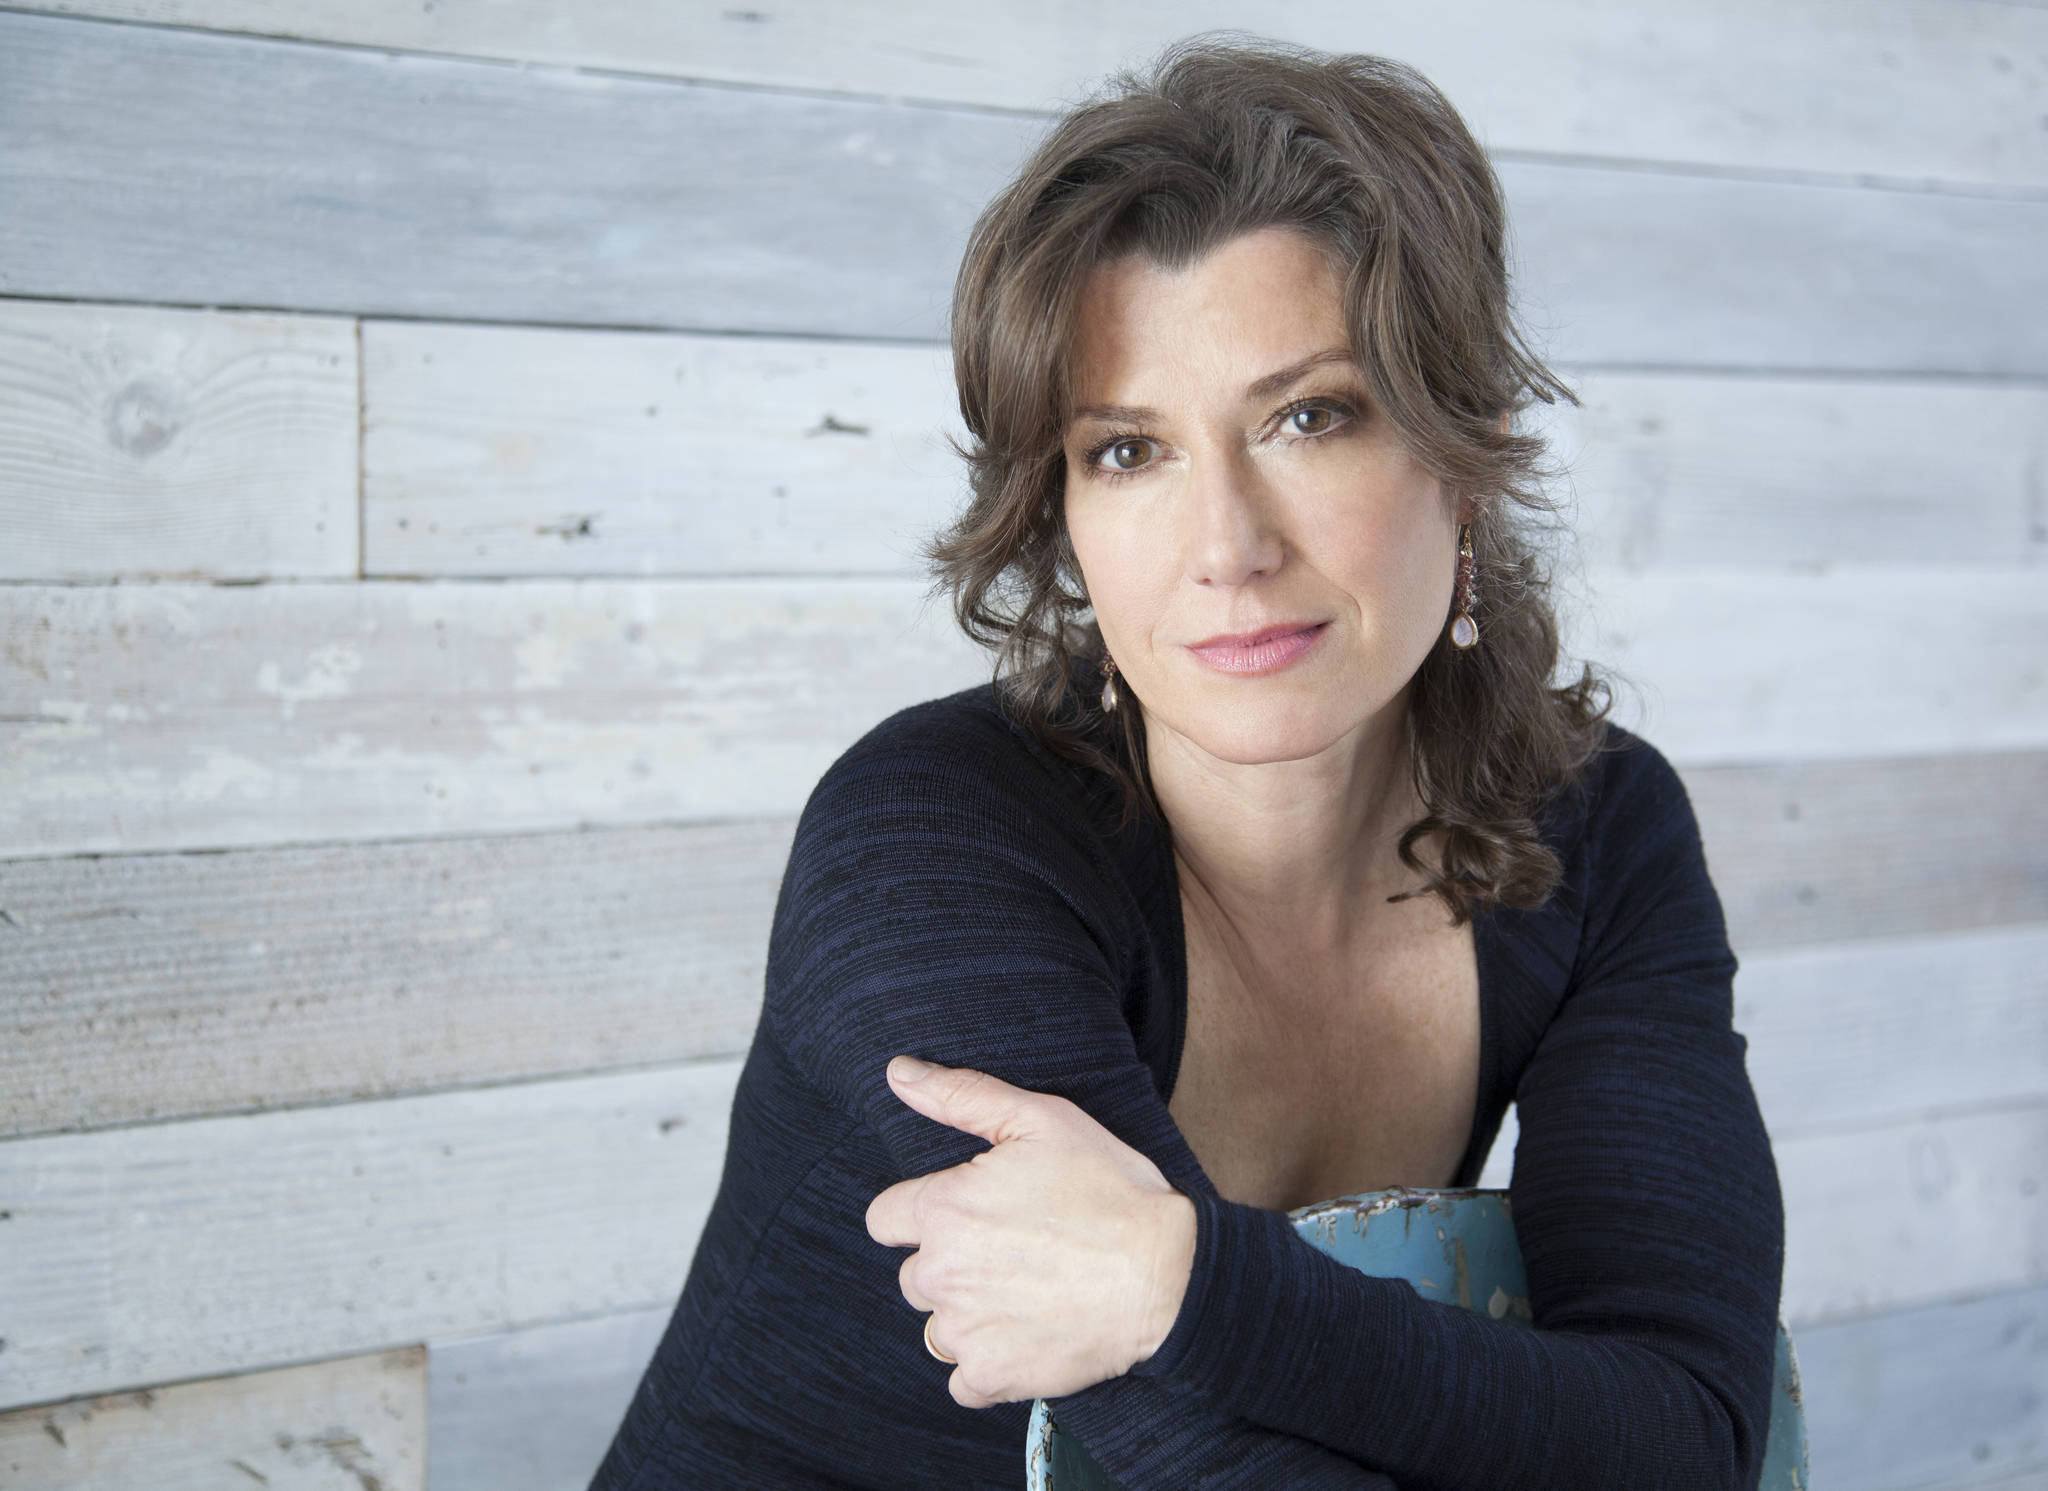 Photo Courtesy of The MWS Group Contemporary Christian singer and songwriter Amy Grant is taking an Alaska cruise this month with musical guests and fans. During their stop in Juneau, Grant will play an acoustic set at Centennial Hall.